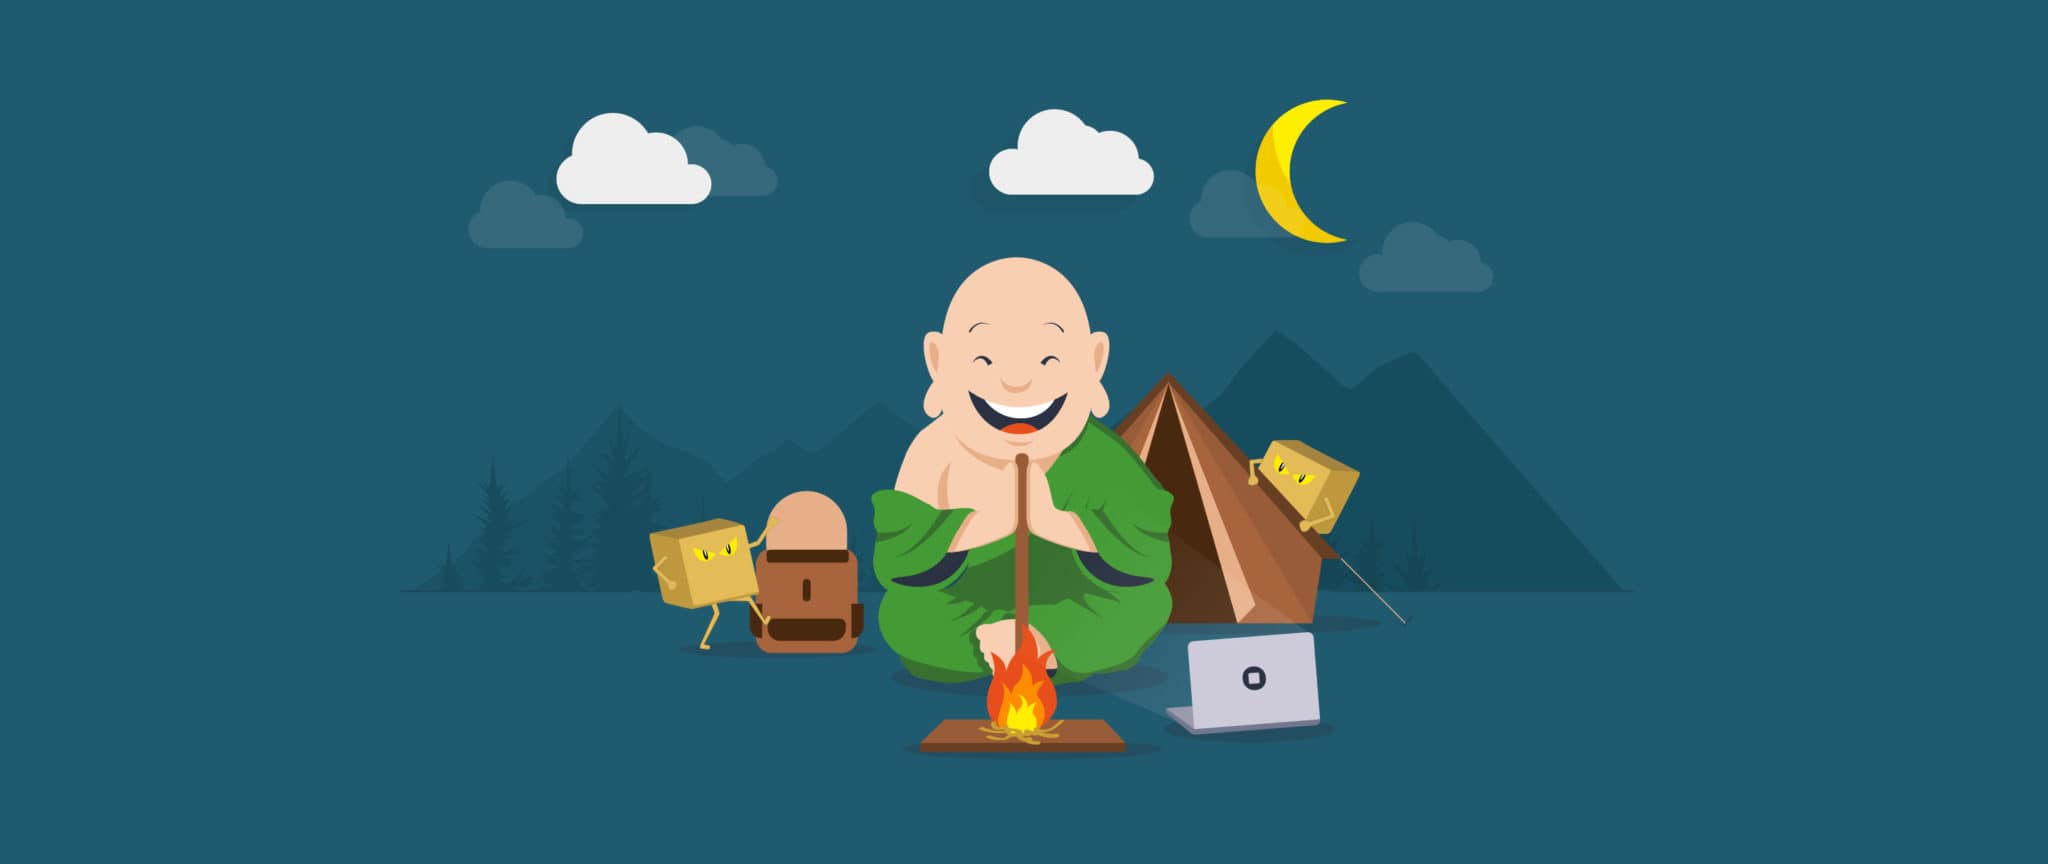 Budd the Monk camps out in the wilderness with his laptop and other essential equipment.